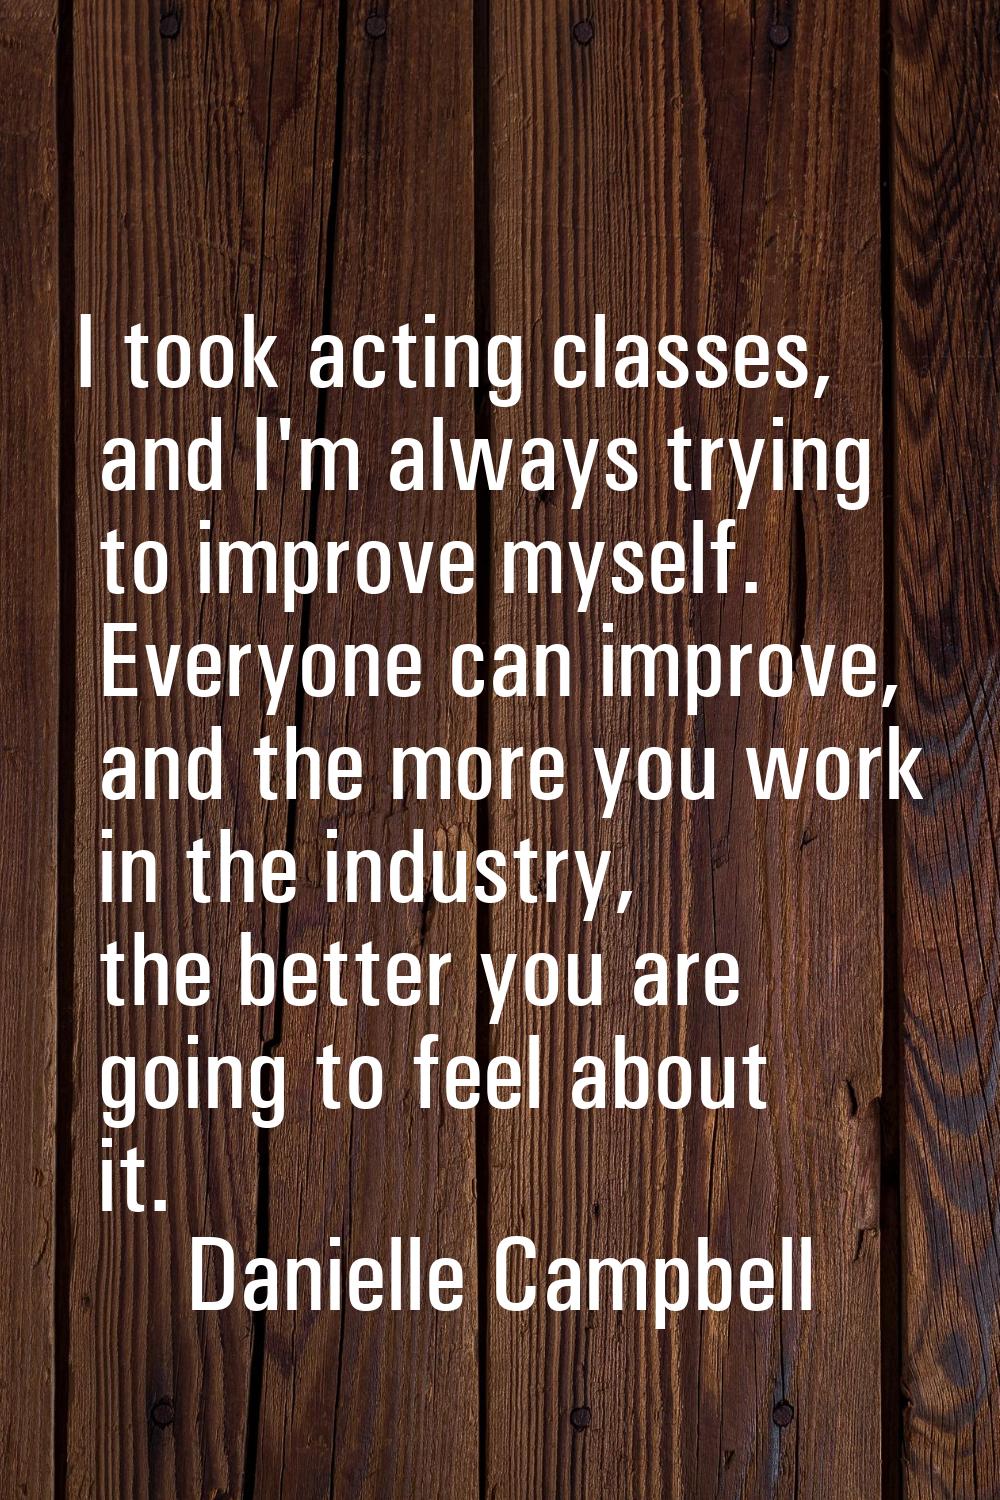 I took acting classes, and I'm always trying to improve myself. Everyone can improve, and the more 